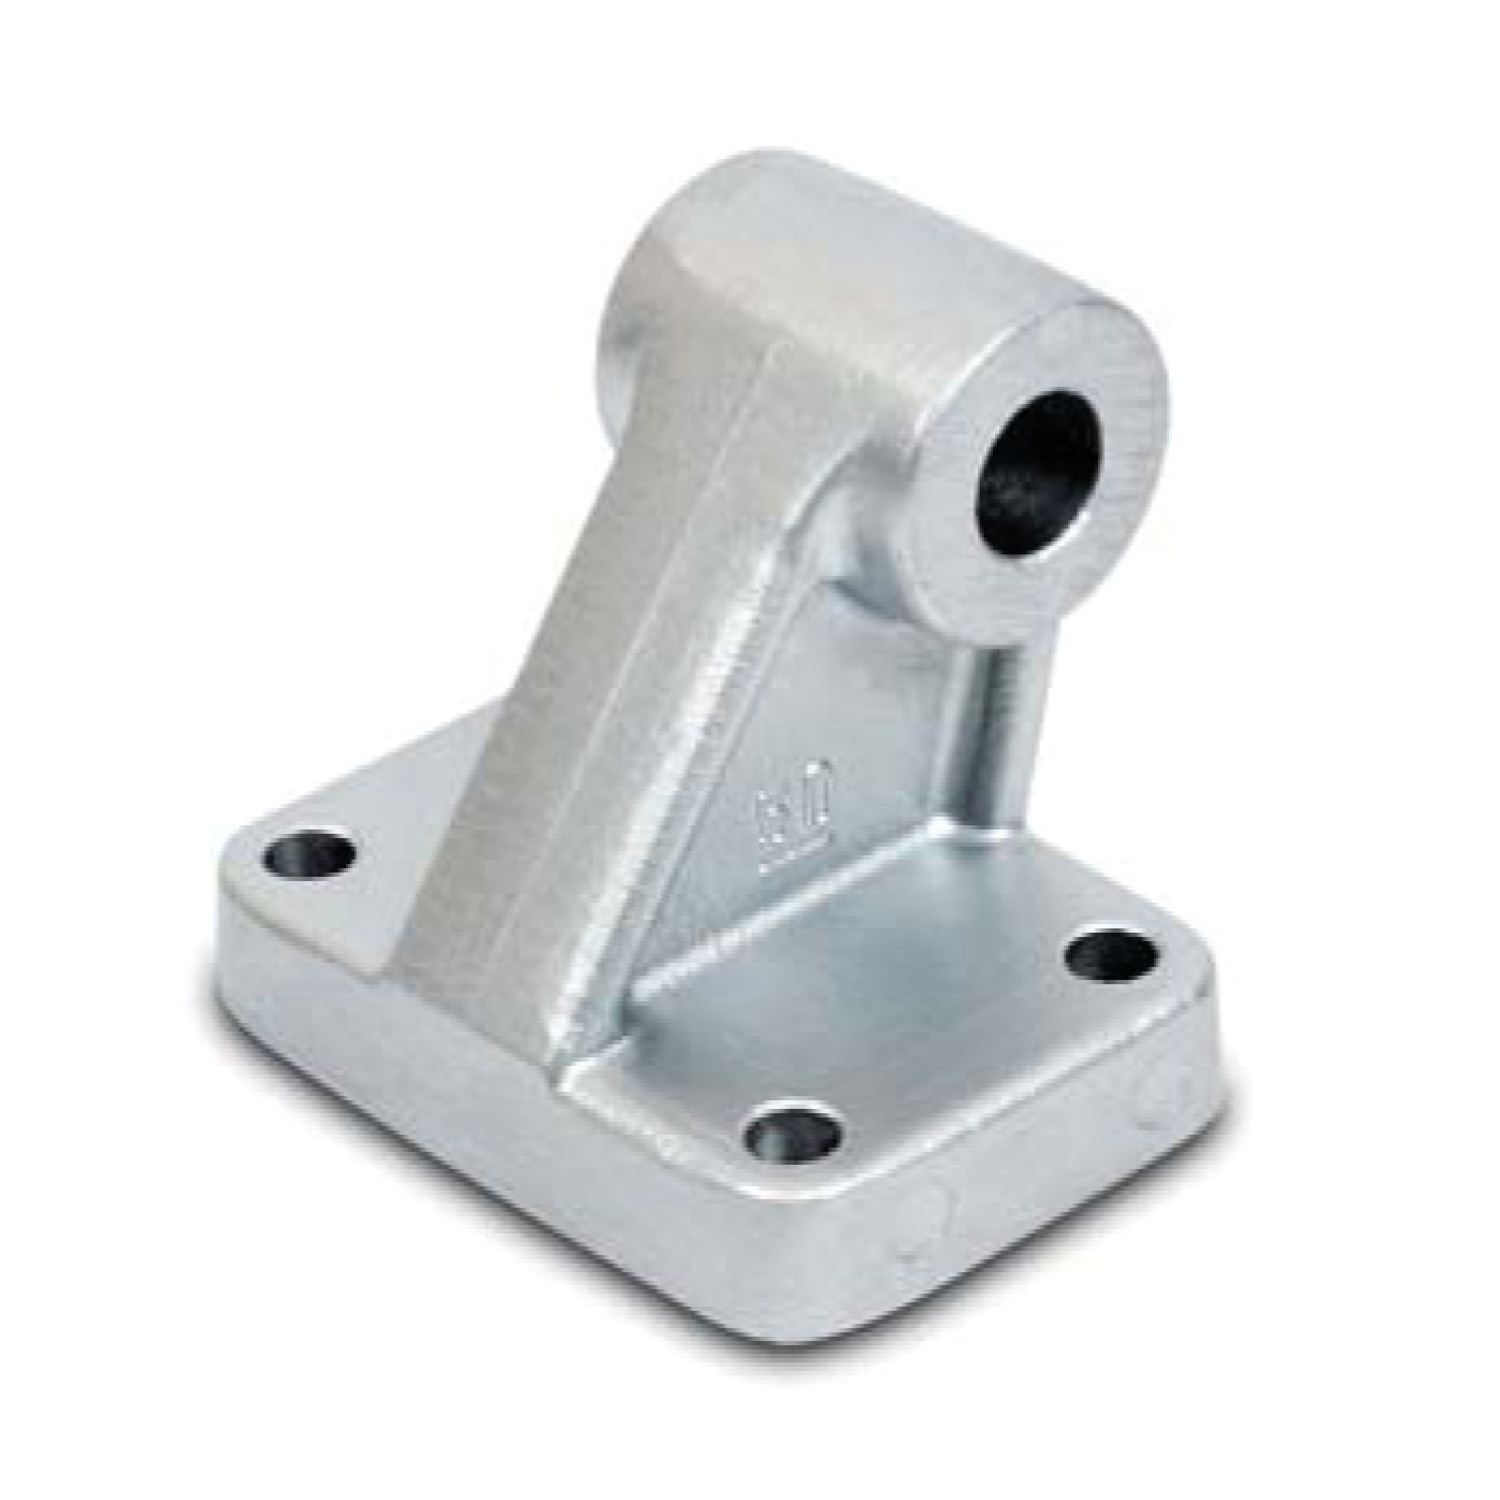 L4812 Air Cylinder Mounts - CETOP Series